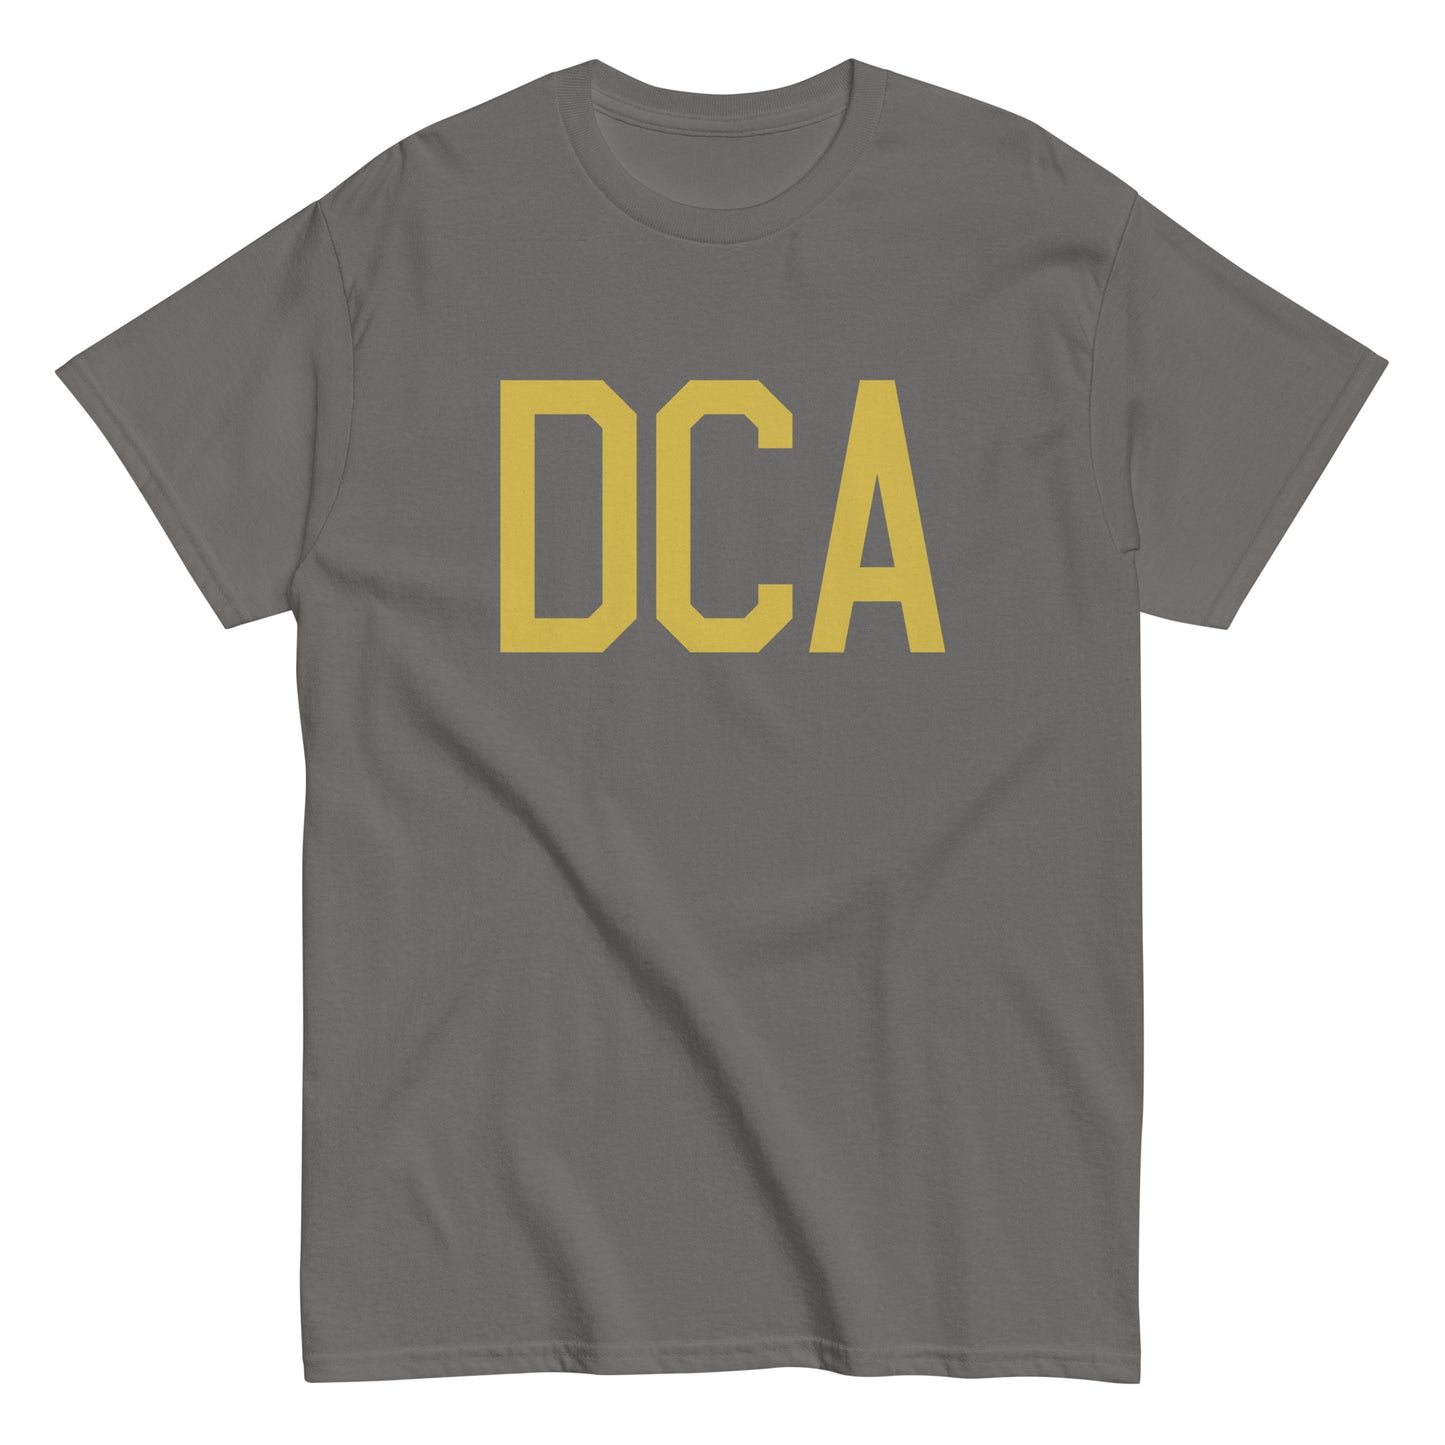 Aviation Enthusiast Men's Tee - Old Gold Graphic • DCA Washington • YHM Designs - Image 01